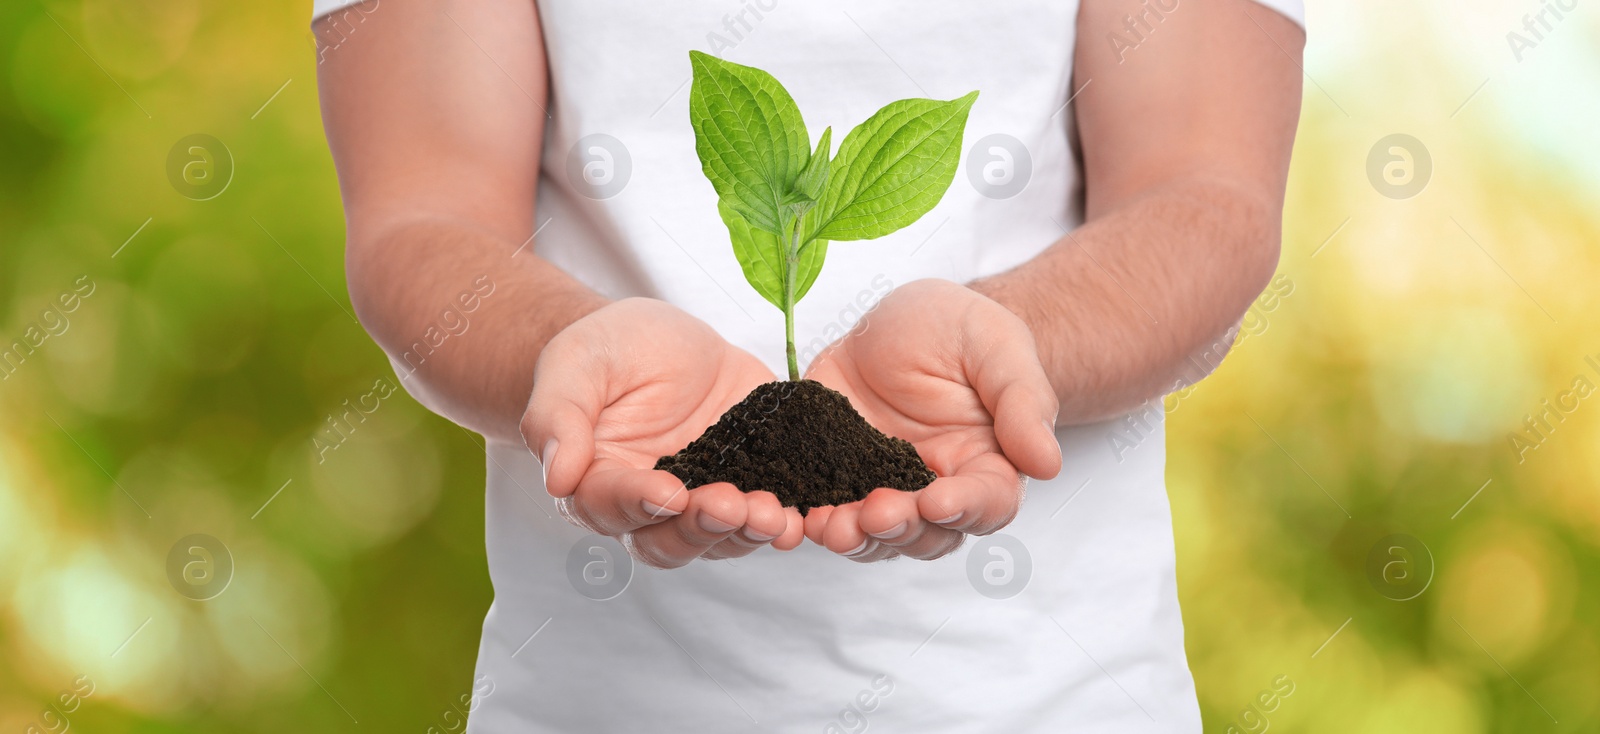 Image of Closeup view of man holding small plant in soil on blurred background, banner design. Ecology protection